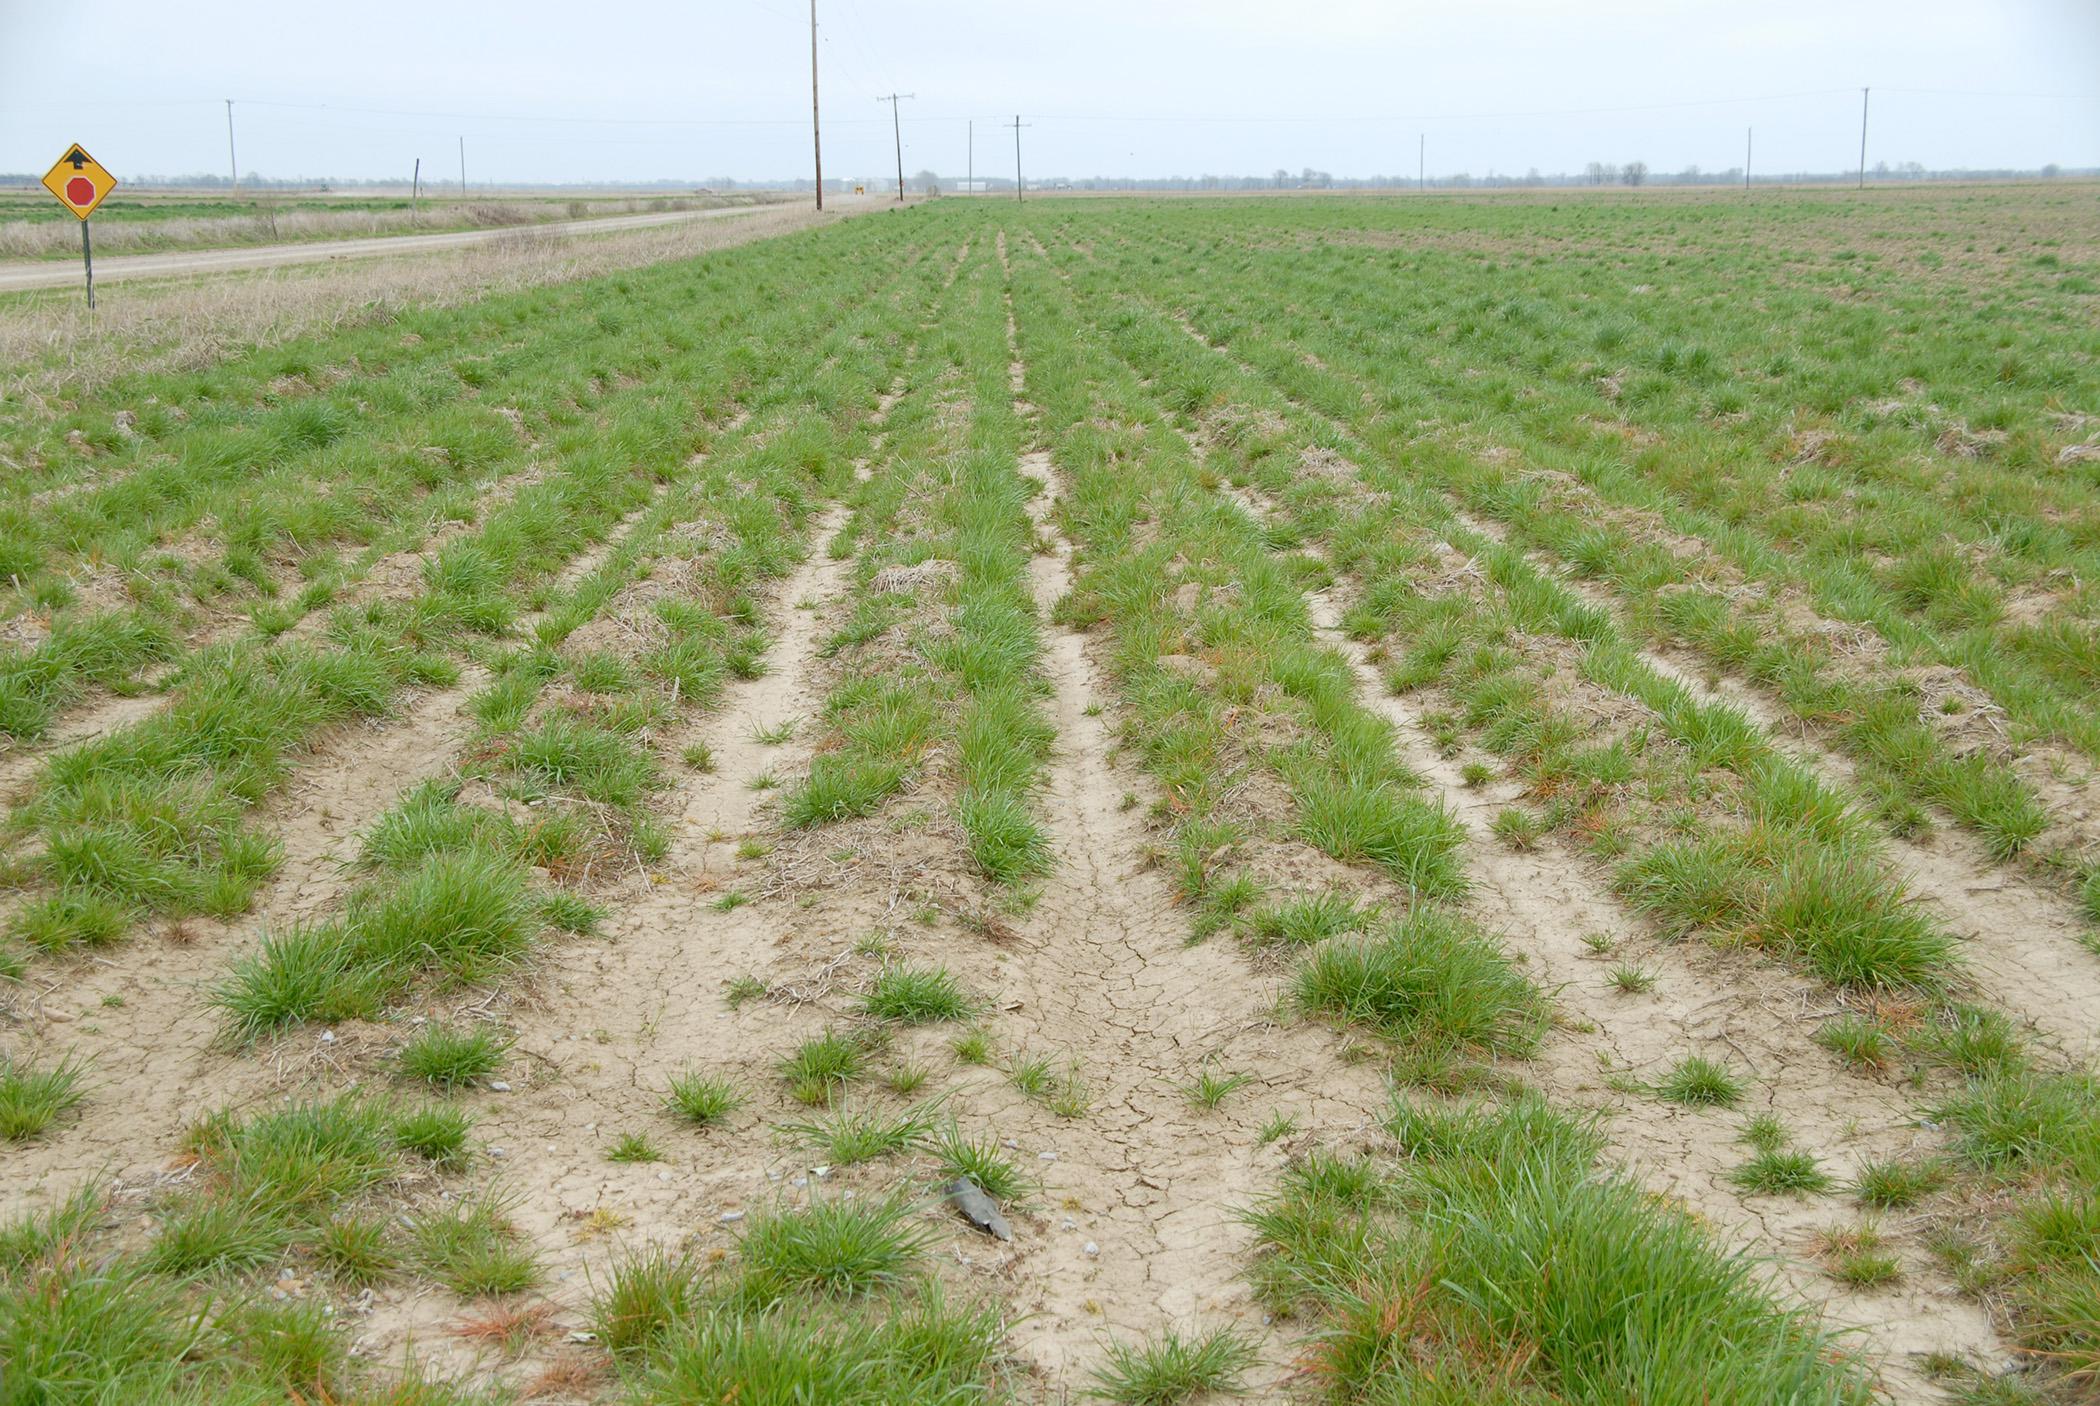 Populations of glyphosate-resistant Italian ryegrass, such as this weed photographed in Washington County in 2010, have been found in 31 Mississippi counties. (Photo by MAFES/Tom Eubank)